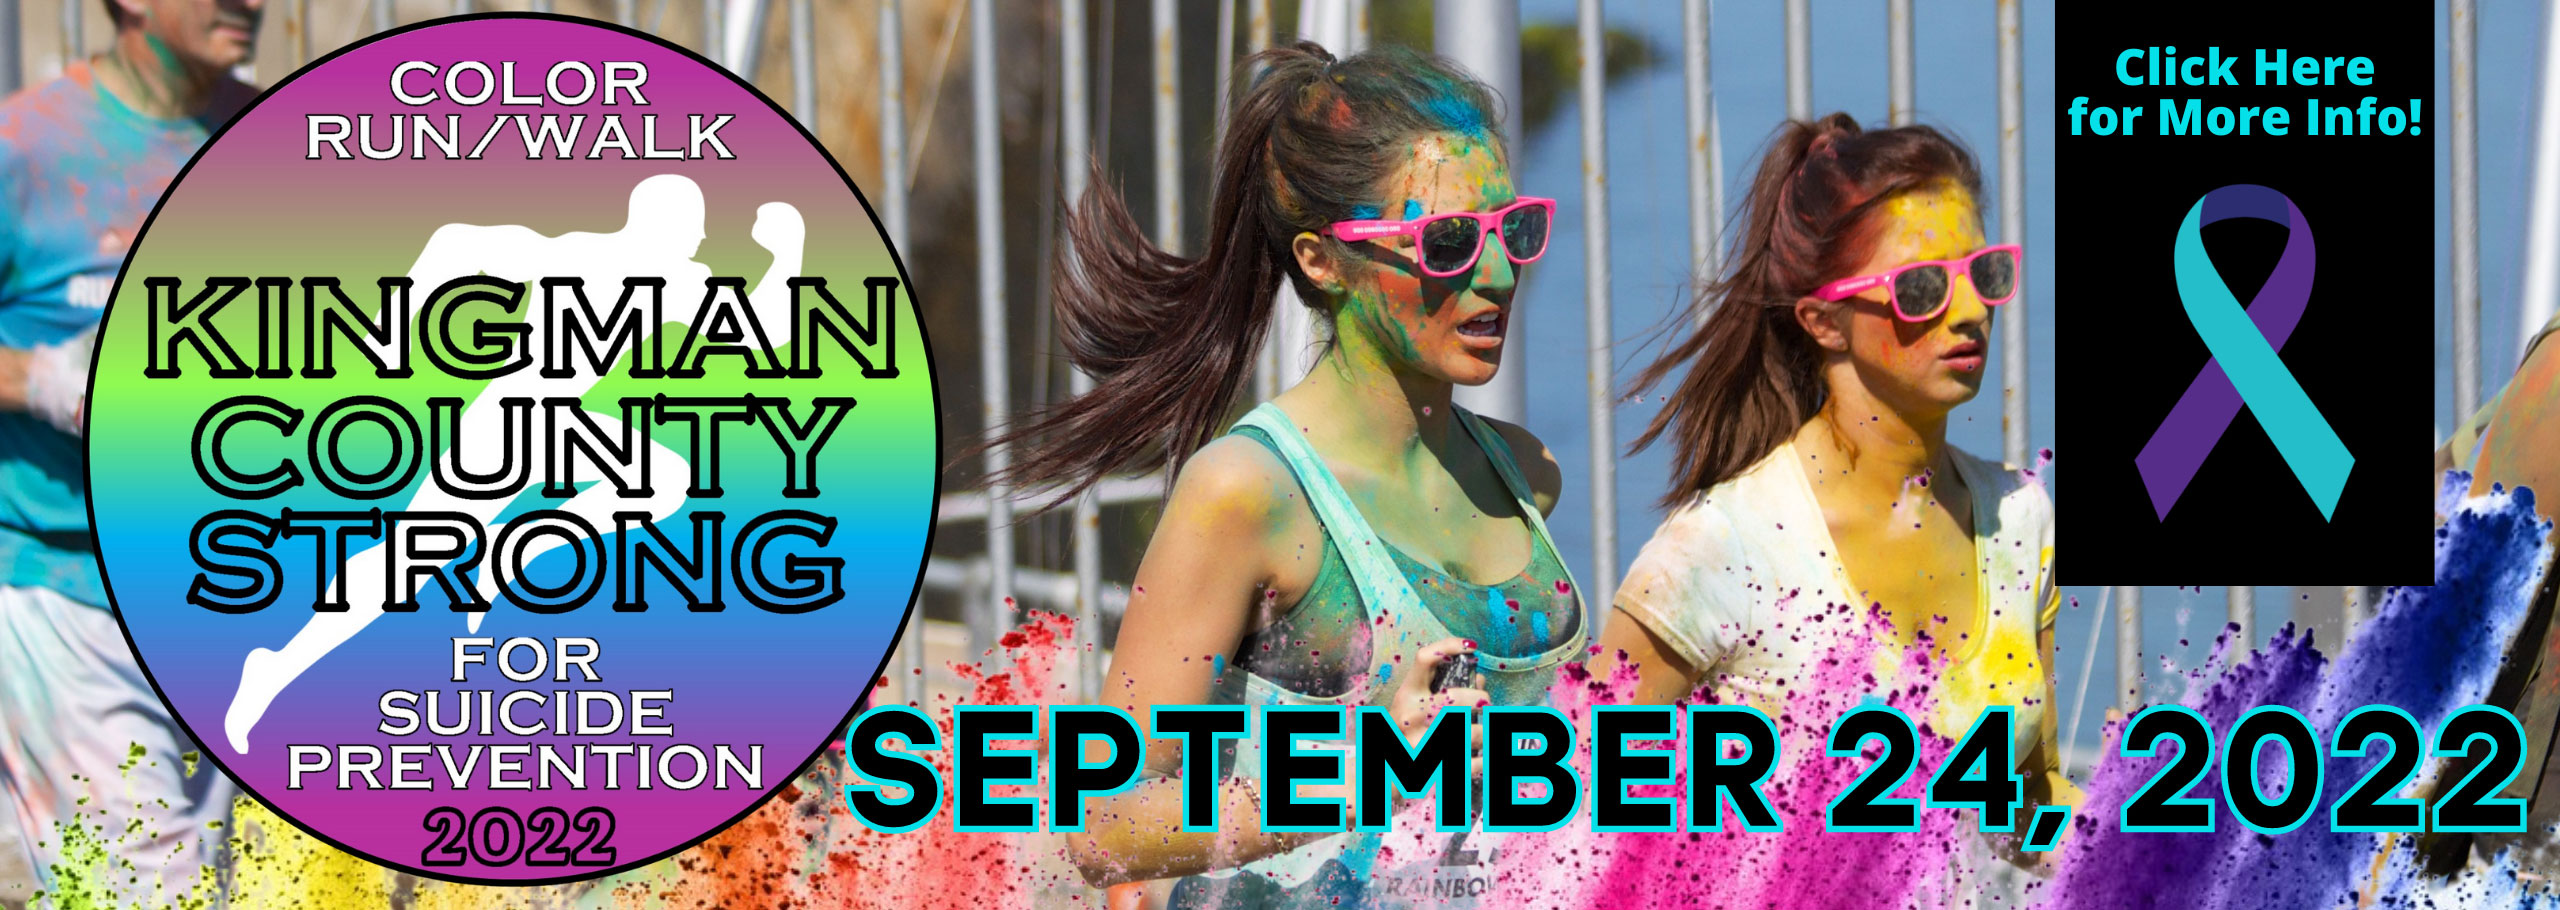 Banner picture of two young females running in the Color Run/Walk. They have paint of different colors splatted on them and they are both wearing sunglasses. Banner says:

COLOR RUN/WALK
KINGMAN COUNTY STRONG
FOR SUICIDE PREVENTION 2022

SEPTEMBER 24, 2022

Click Here for More Info! 
(suicide prevention ribbon)